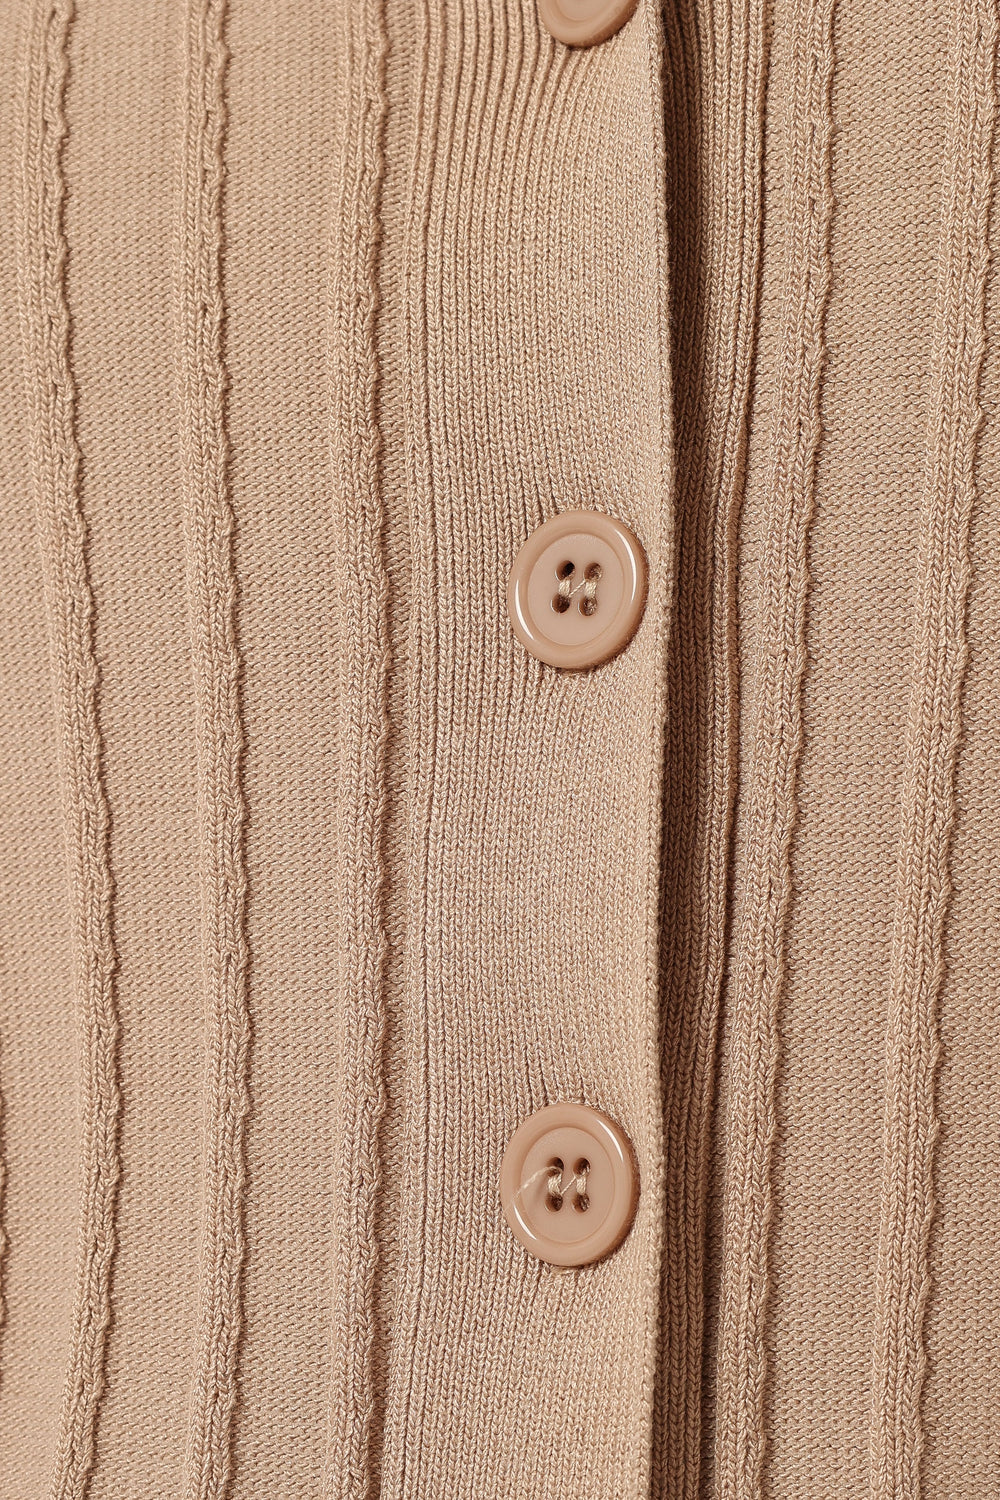 TOPS @Tibi Ribbed Top - Beige (Hold for Cool Beginnings)